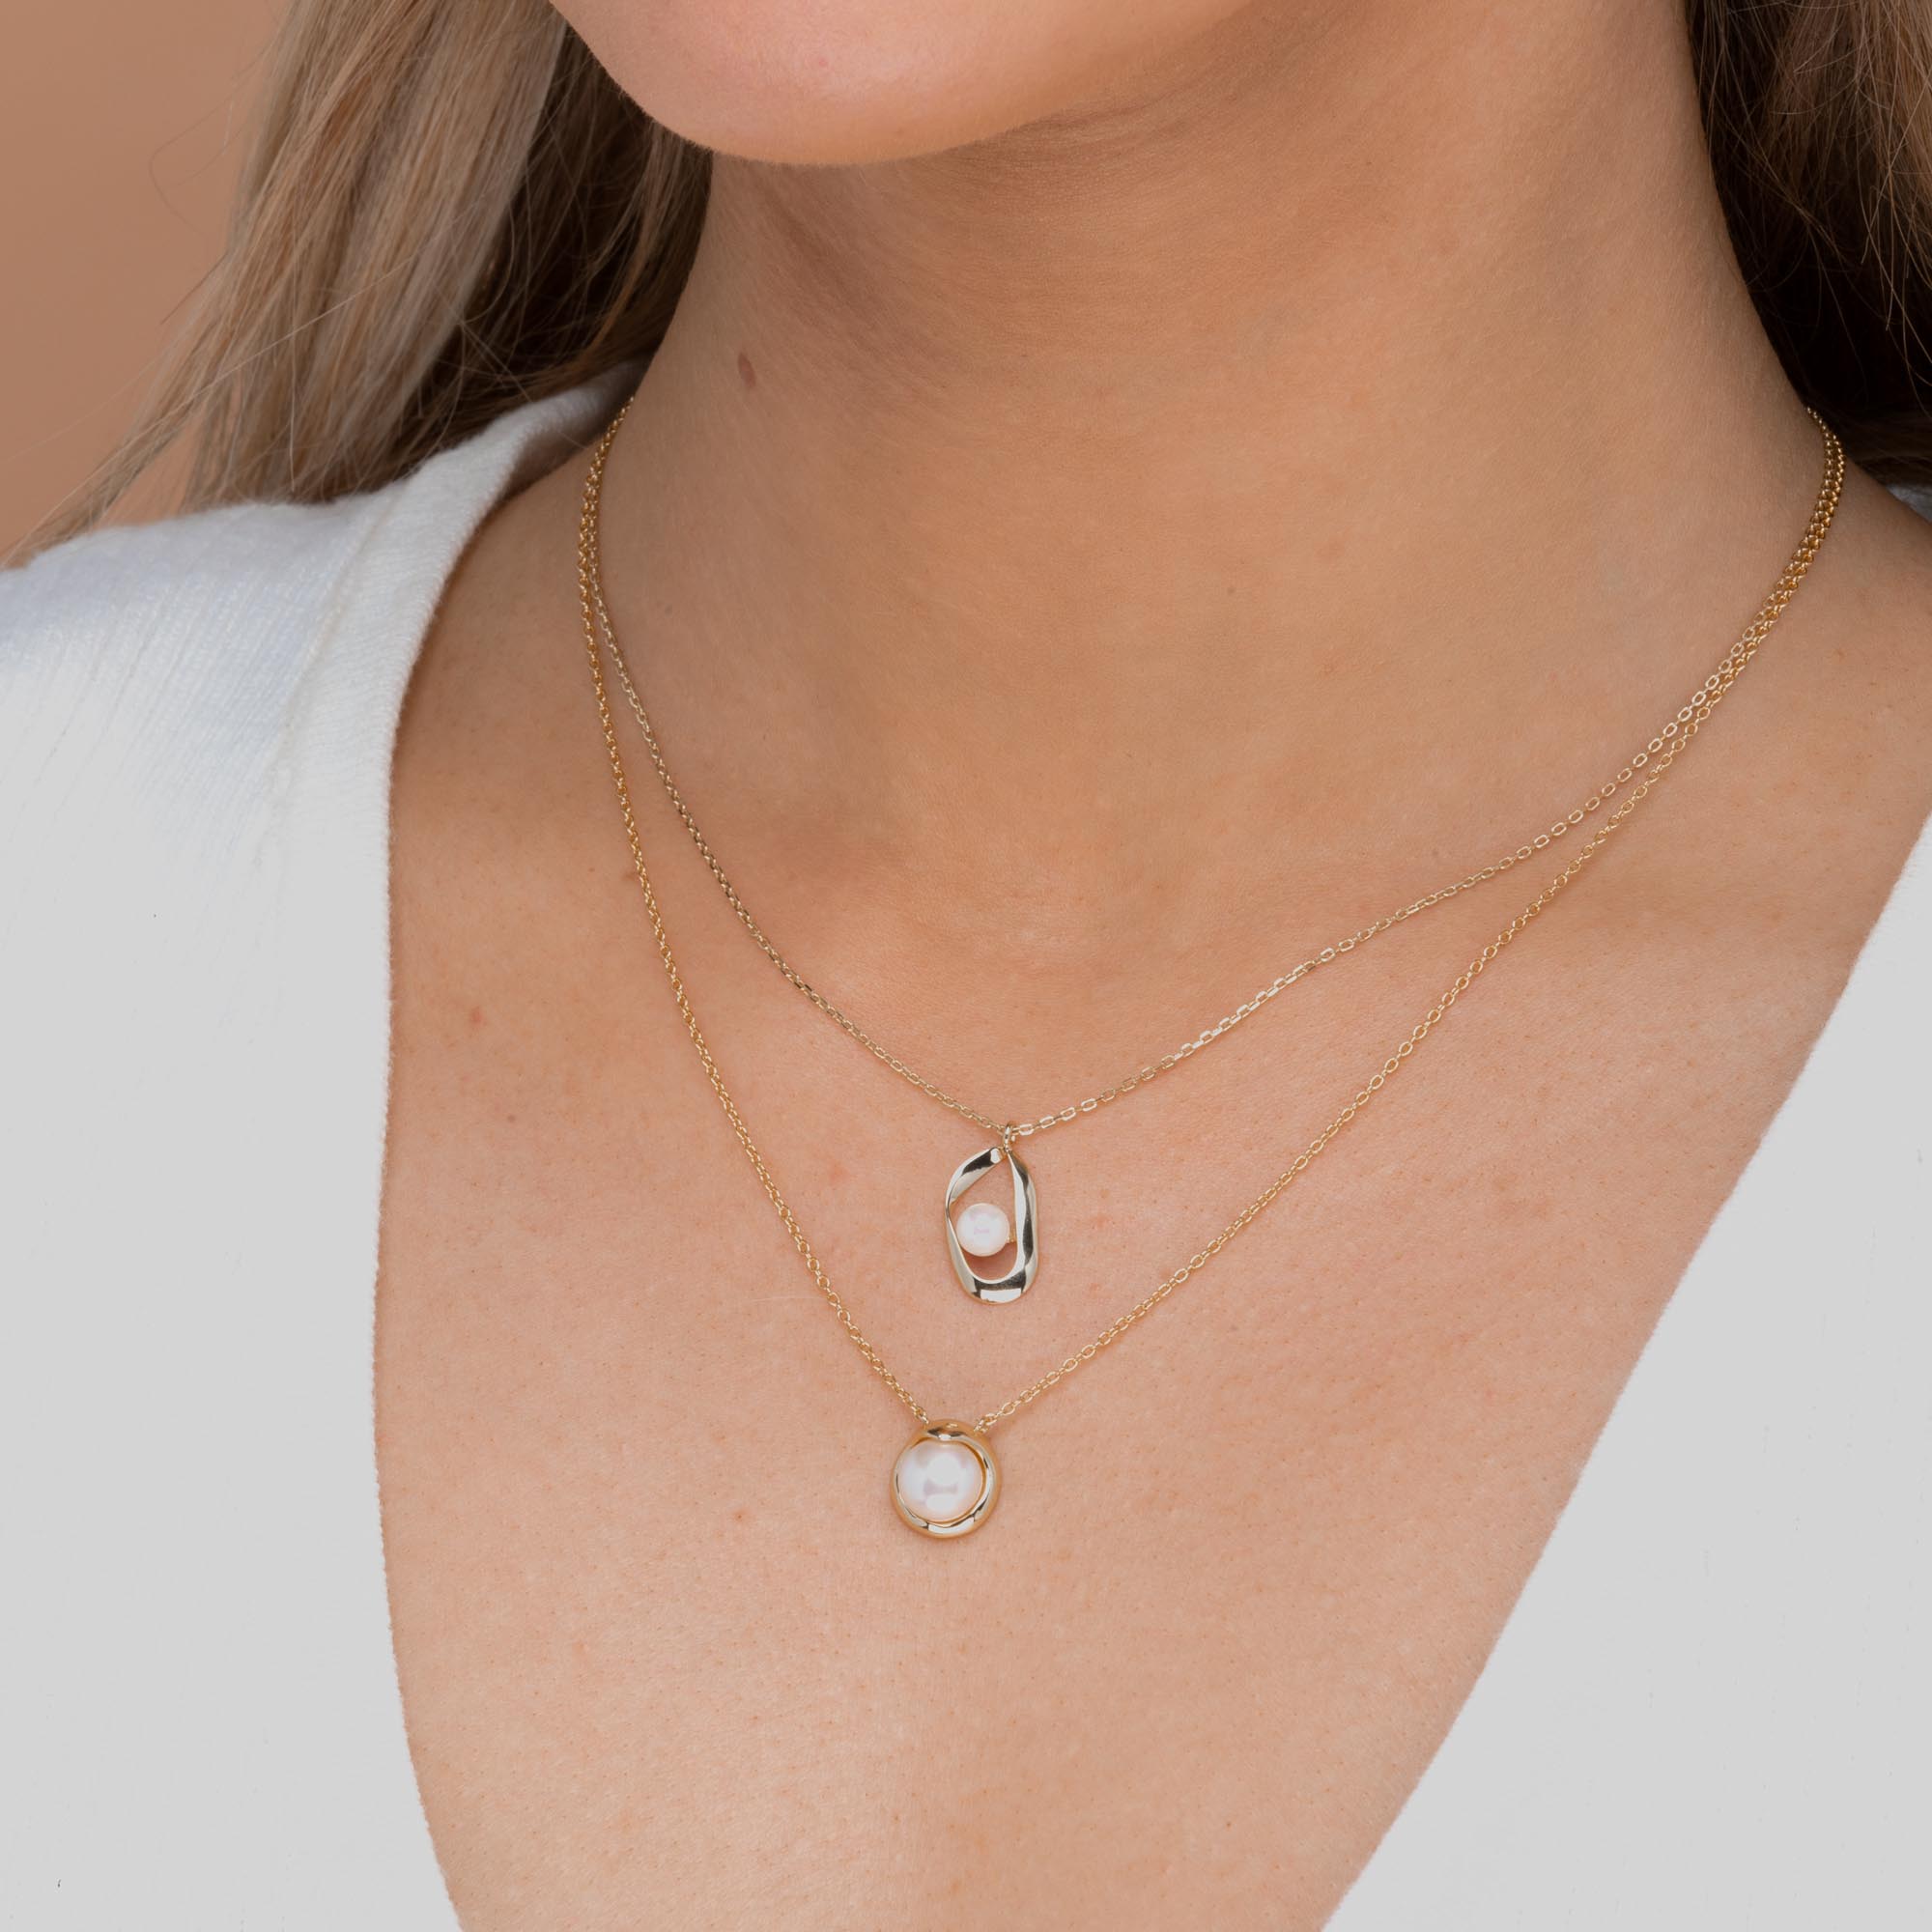 Floating Circular Pearl Necklace